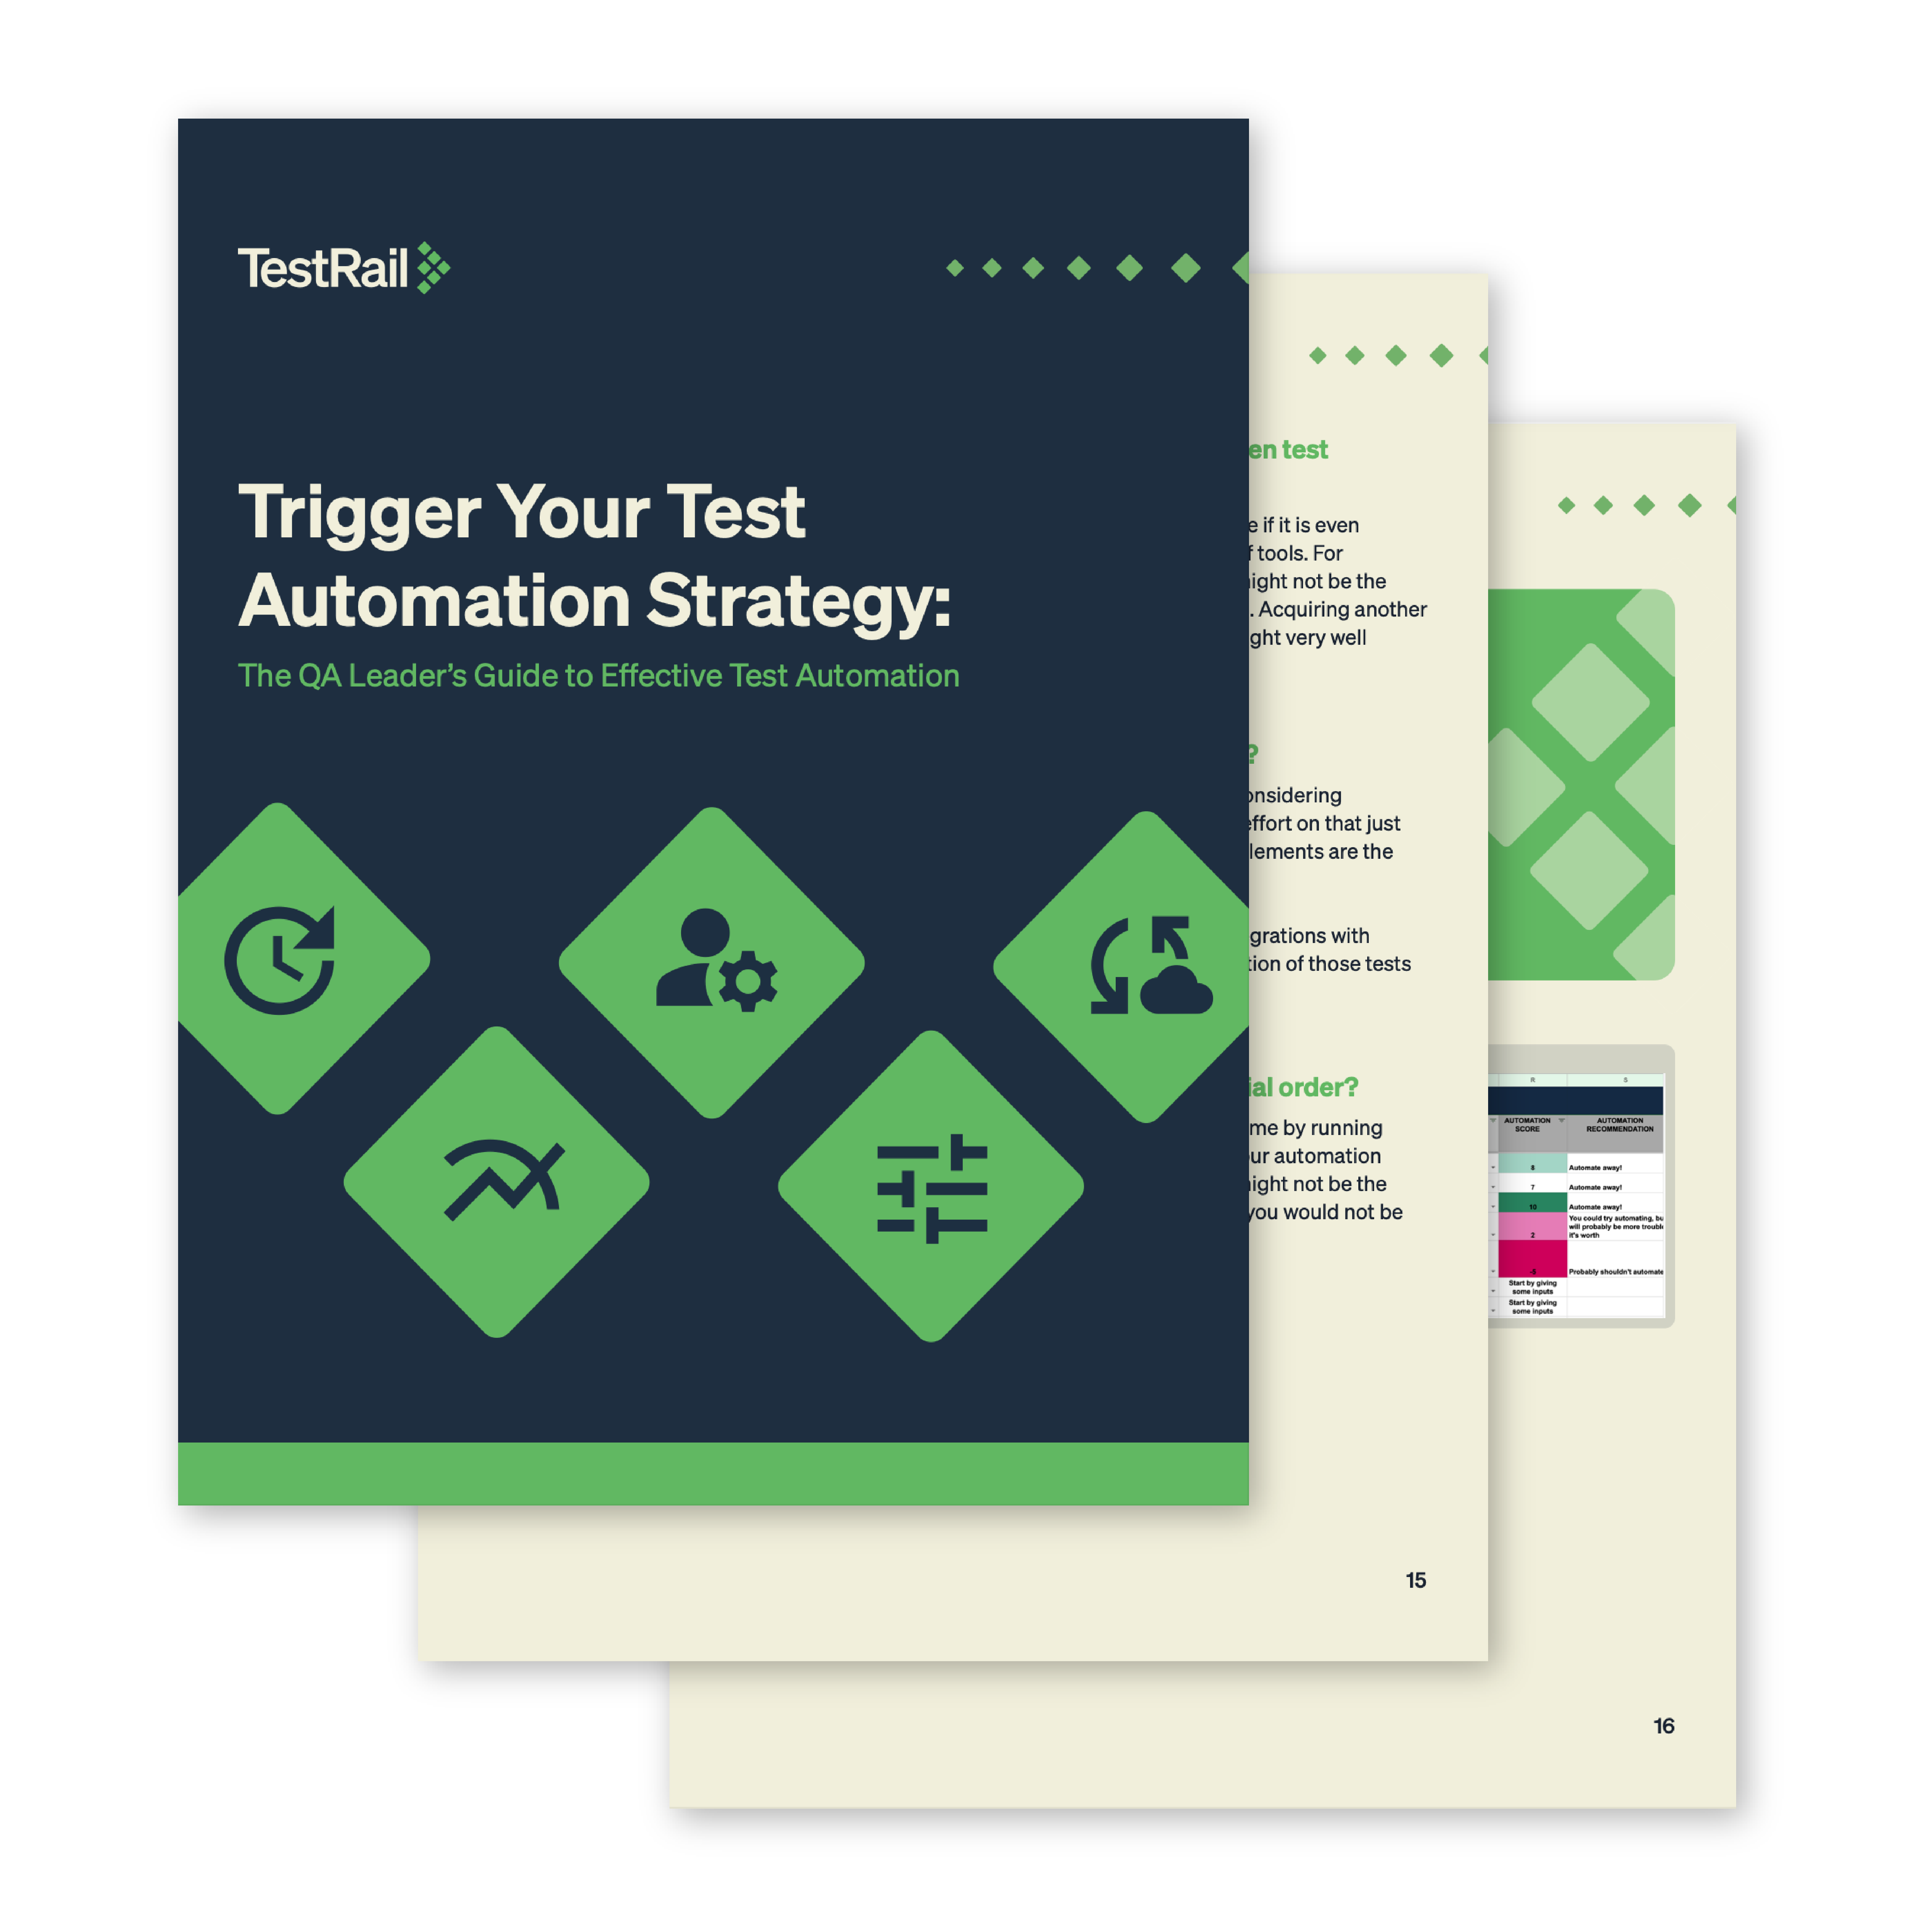 Trigger Your Test Automation Strategy: The QA Leader’s Guide to Effective Test Automation